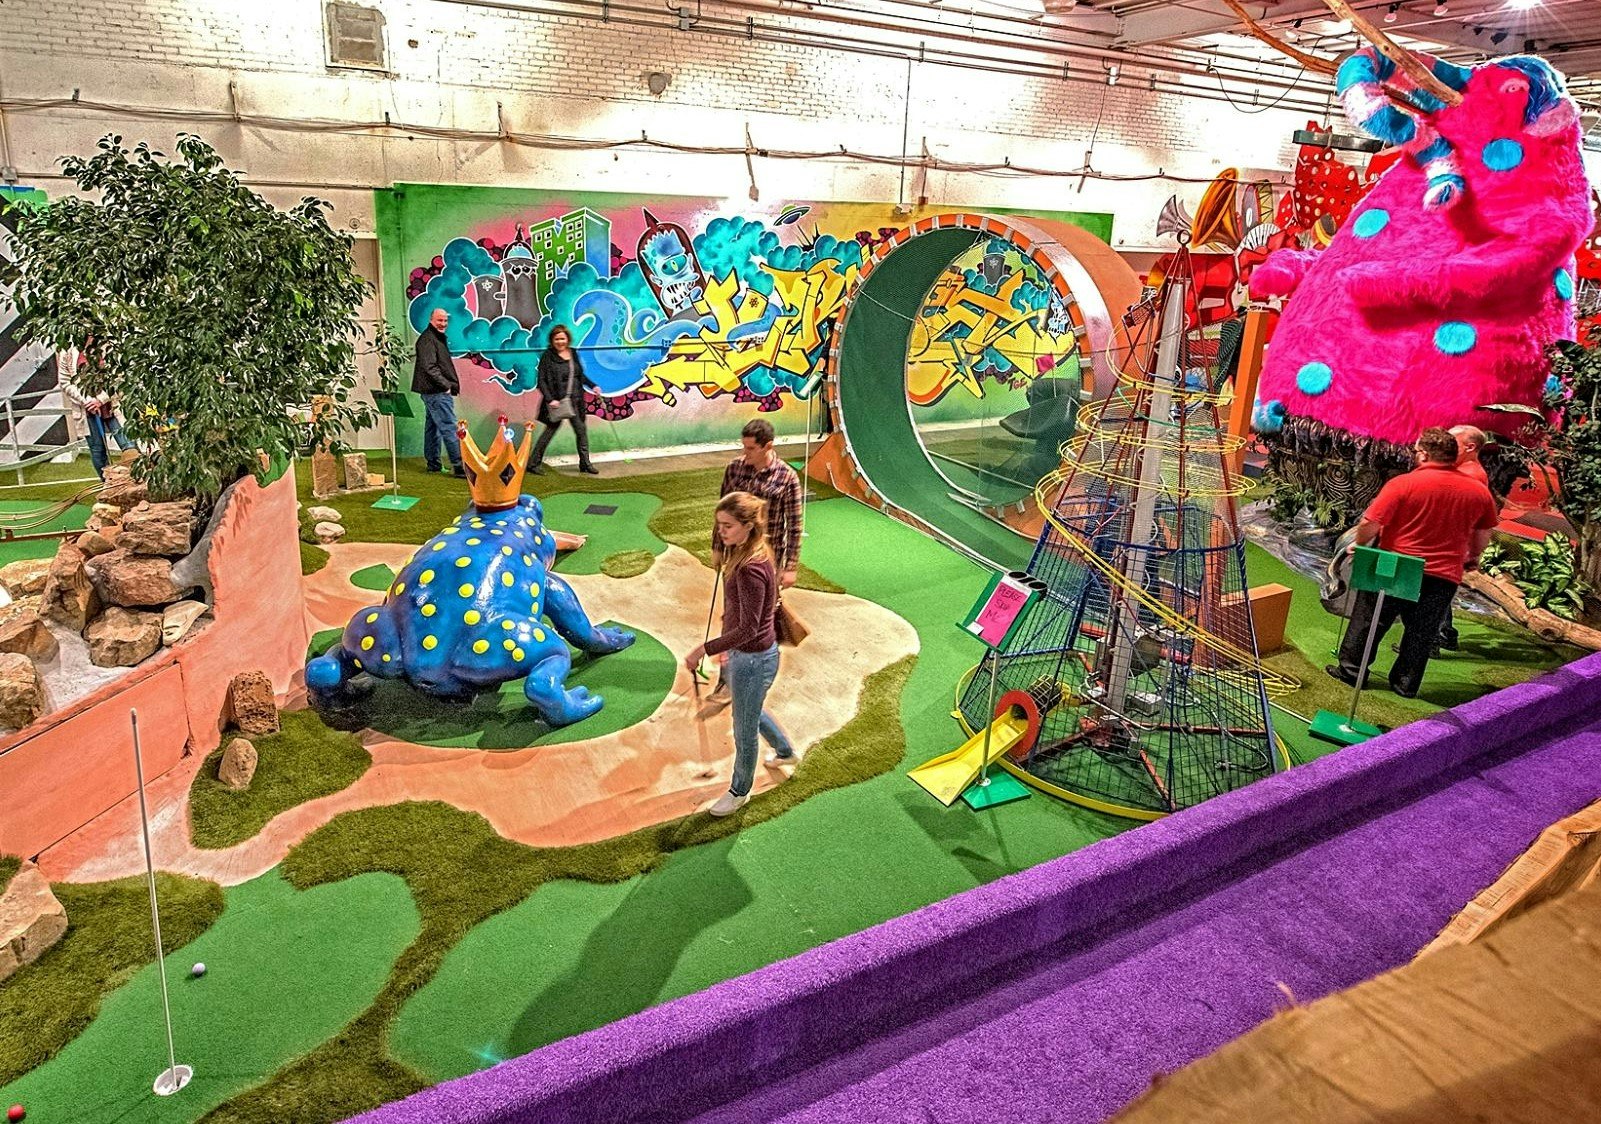 An aerial view of the mini golf course at Can Can Wonderland, which contains novelty objects like a giant frog and large 'loop the loop' structure.